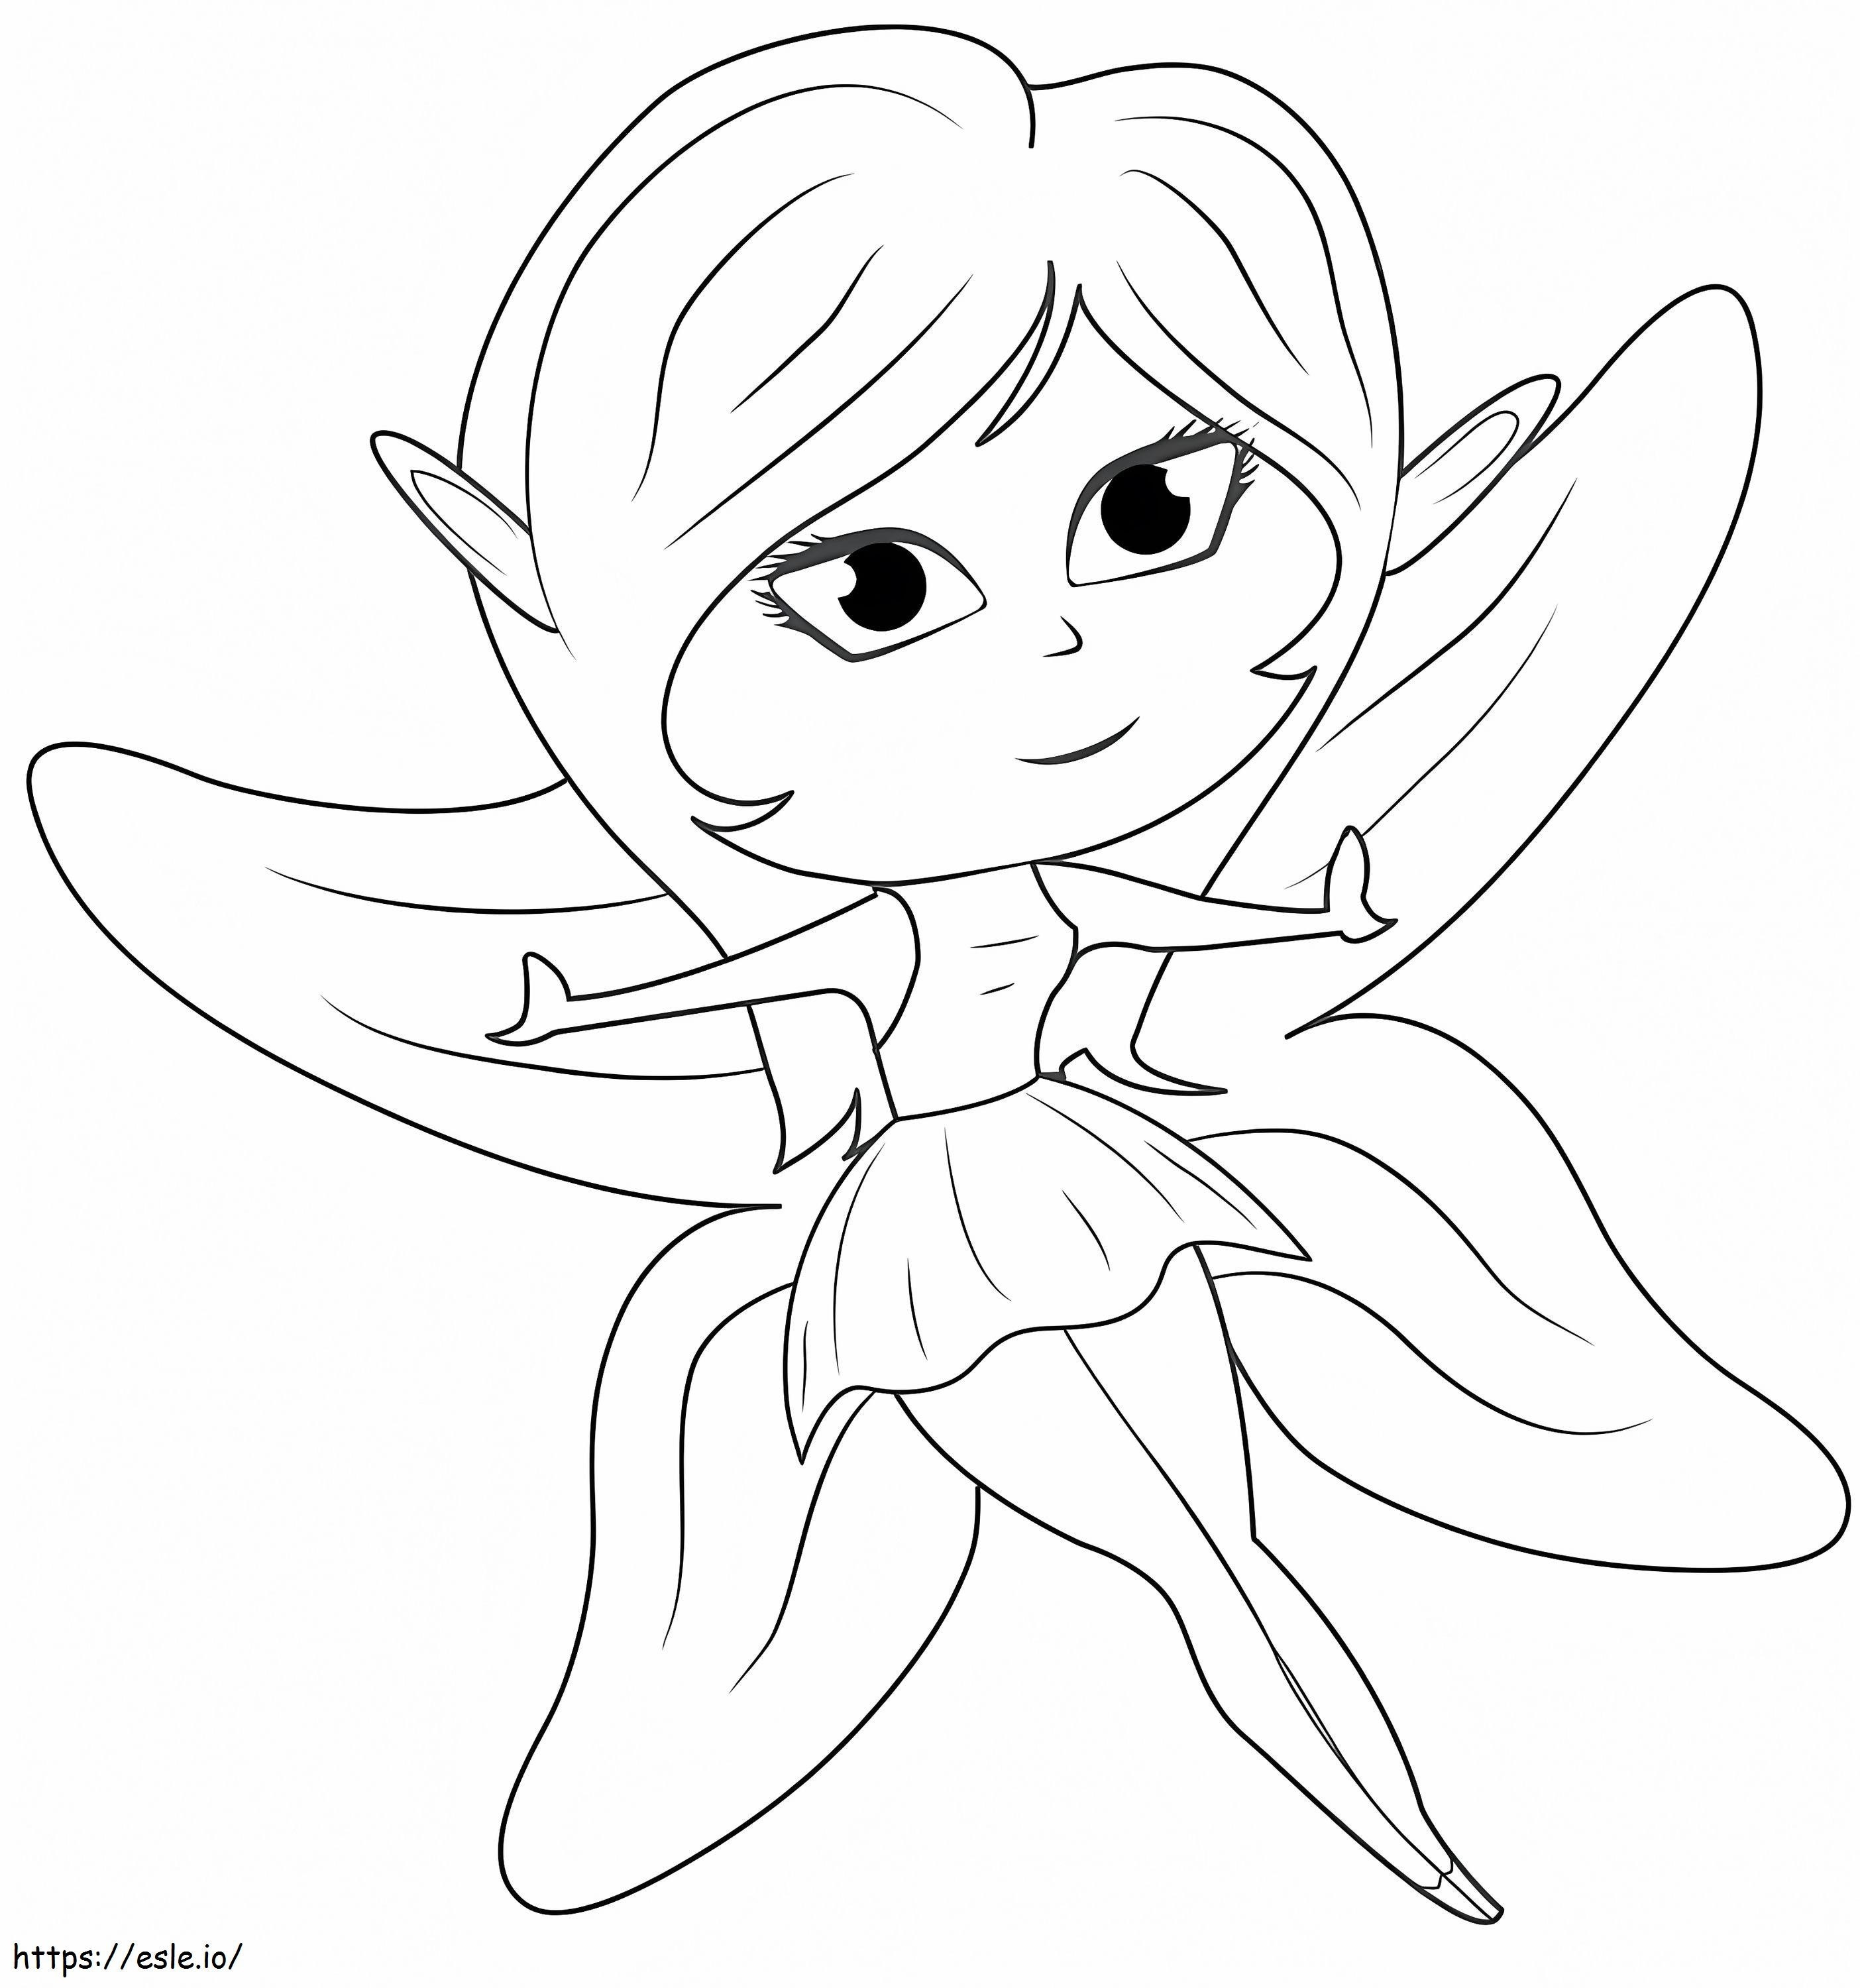 Adorable Fairy coloring page